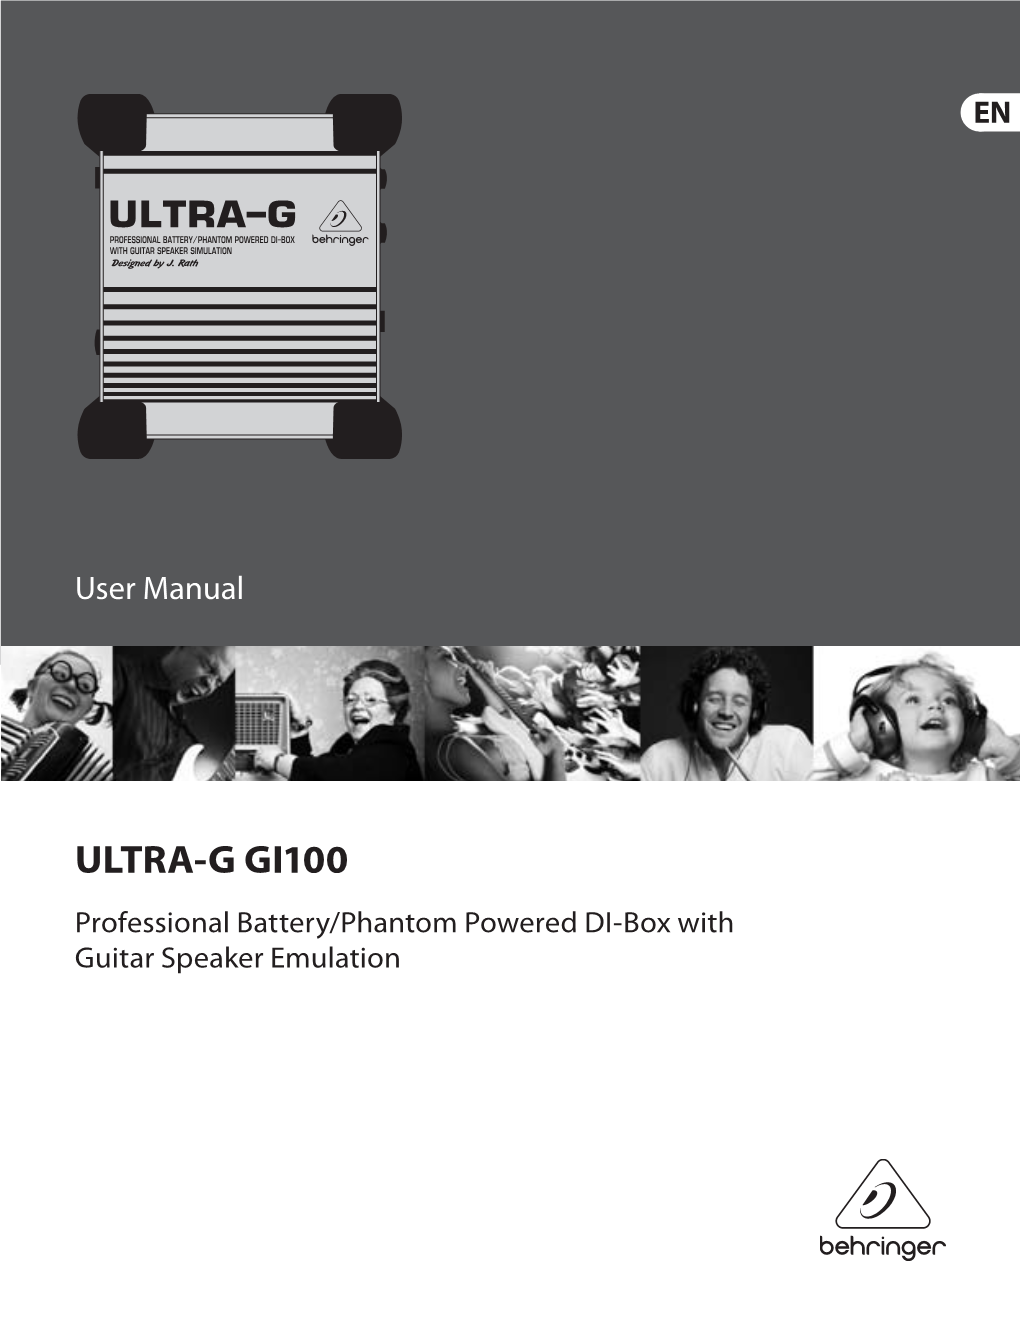 ULTRA-G GI100 Professional Battery/Phantom Powered DI-Box with Guitar Speaker Emulation 2 ULTRA-G GI100 User Manual Table of Contents Thank You